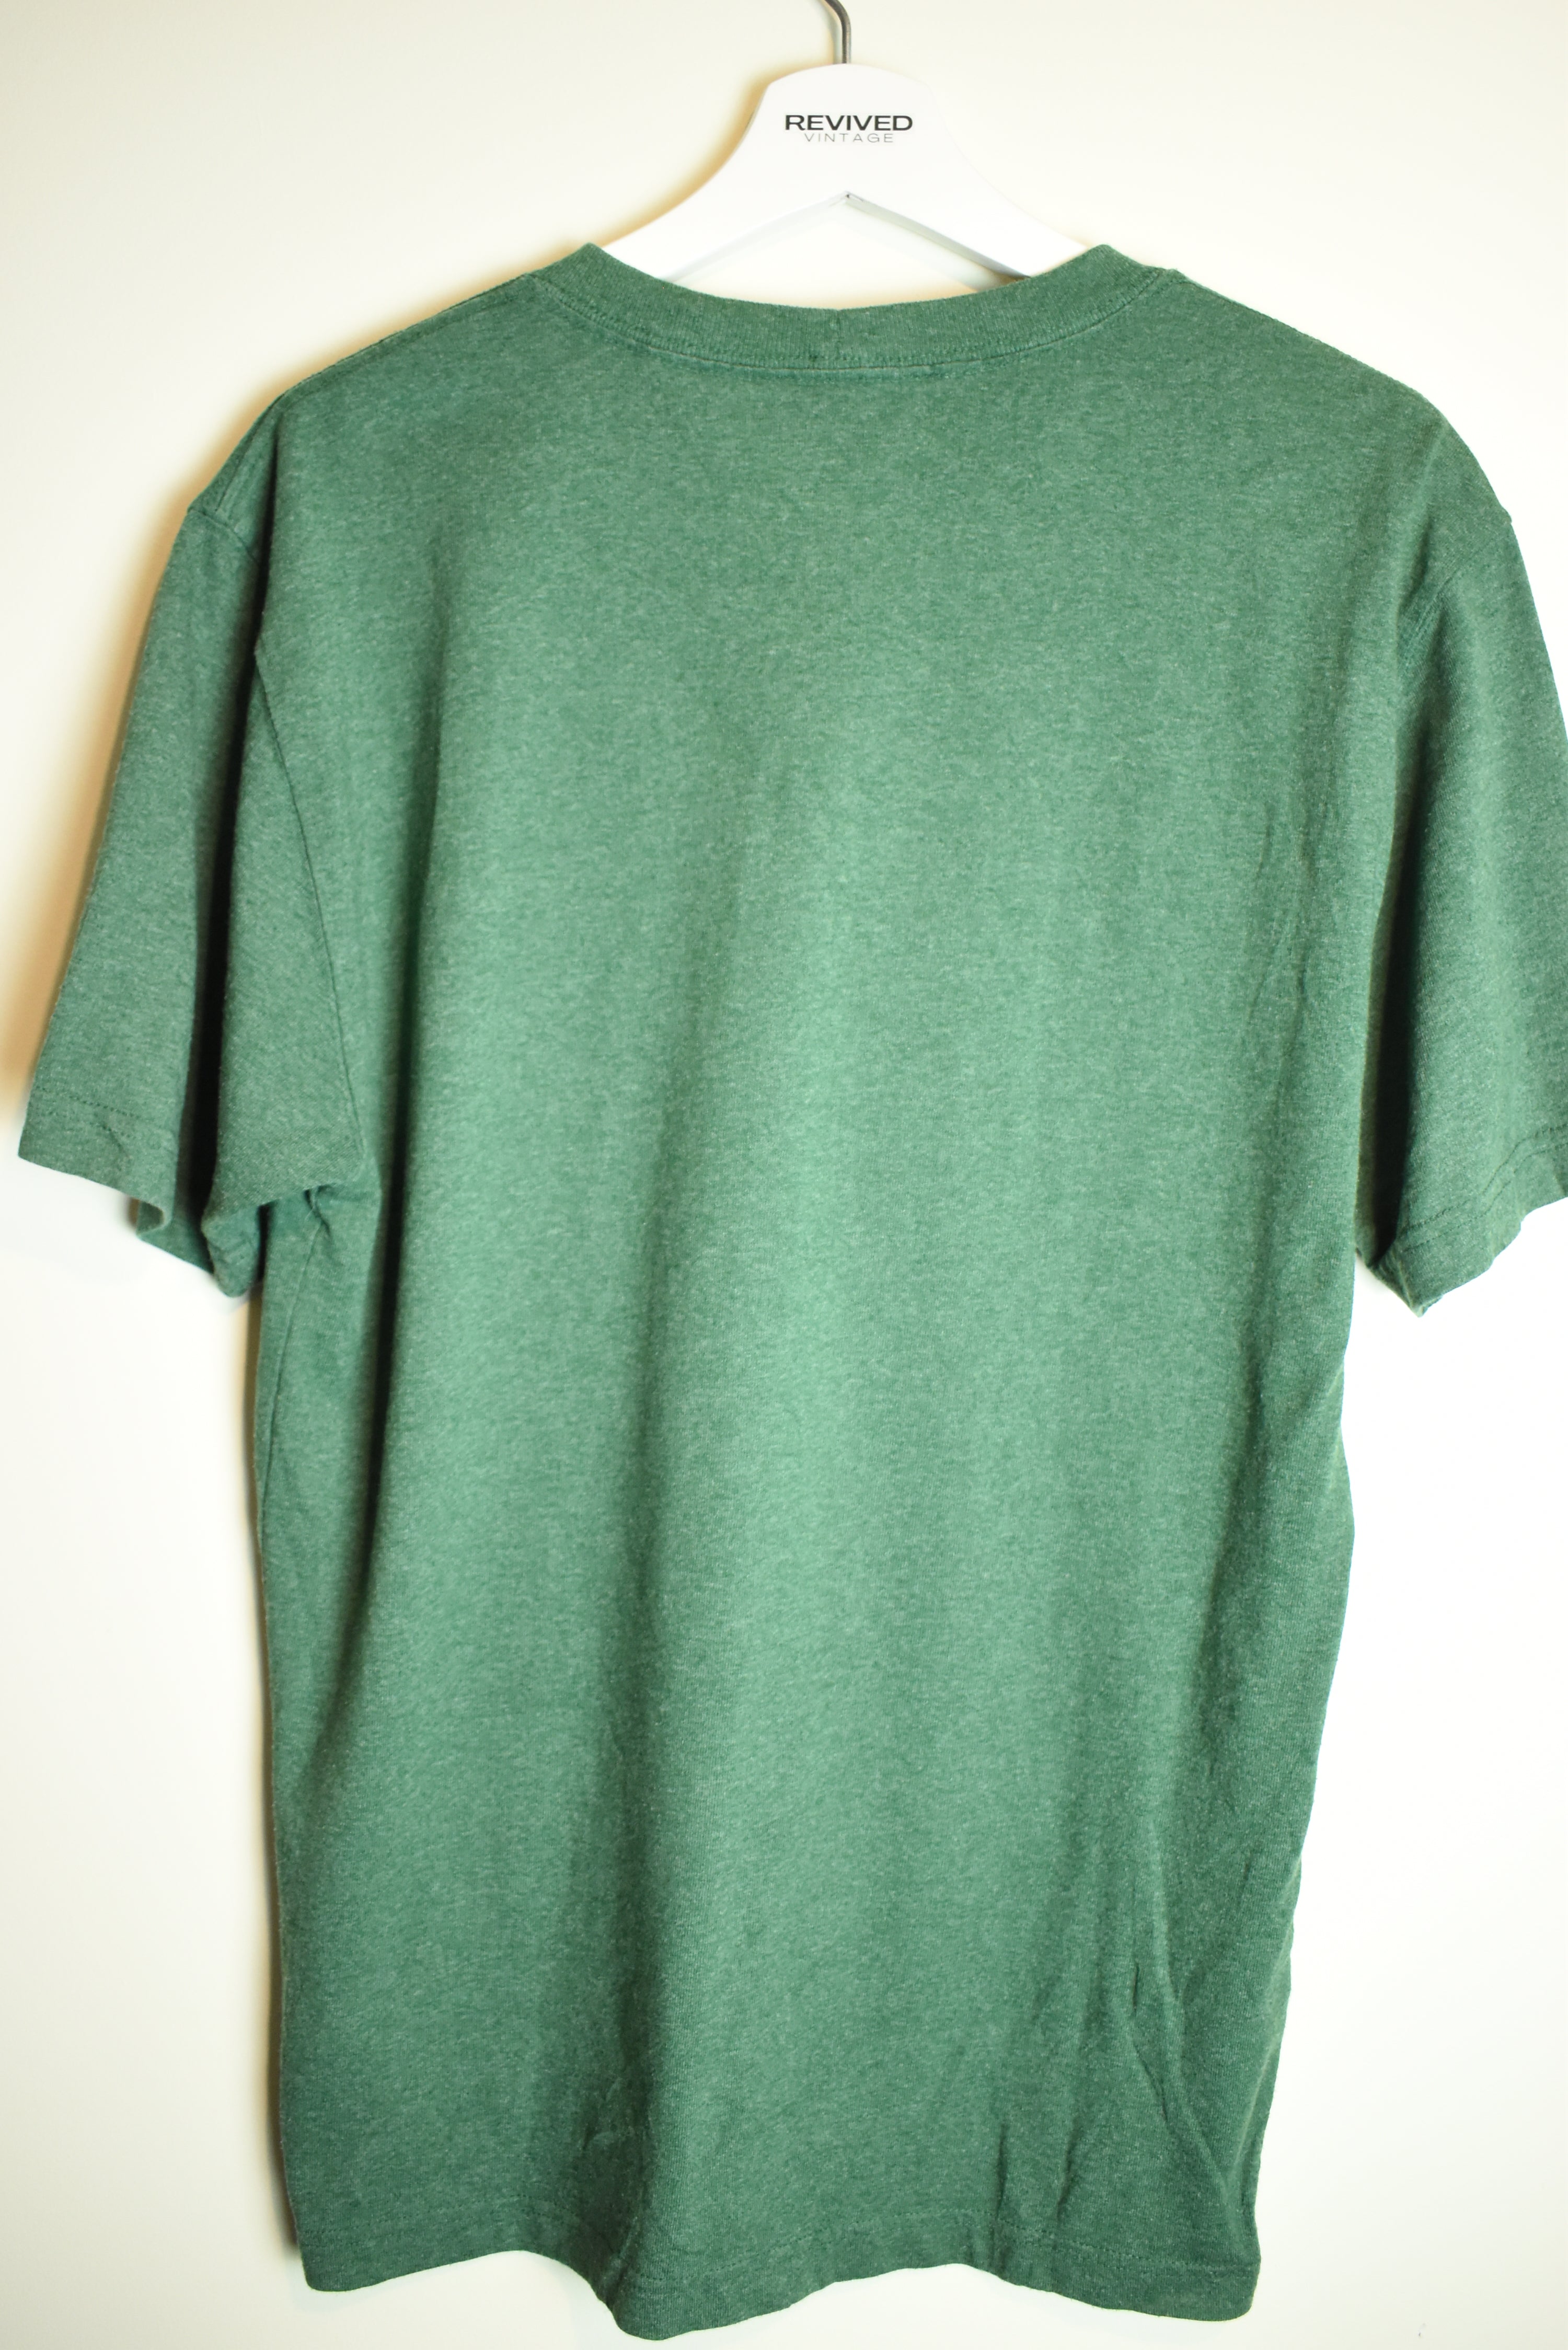 Vintage Carhartt Green Cotton T-Shirt Loose Fit Small